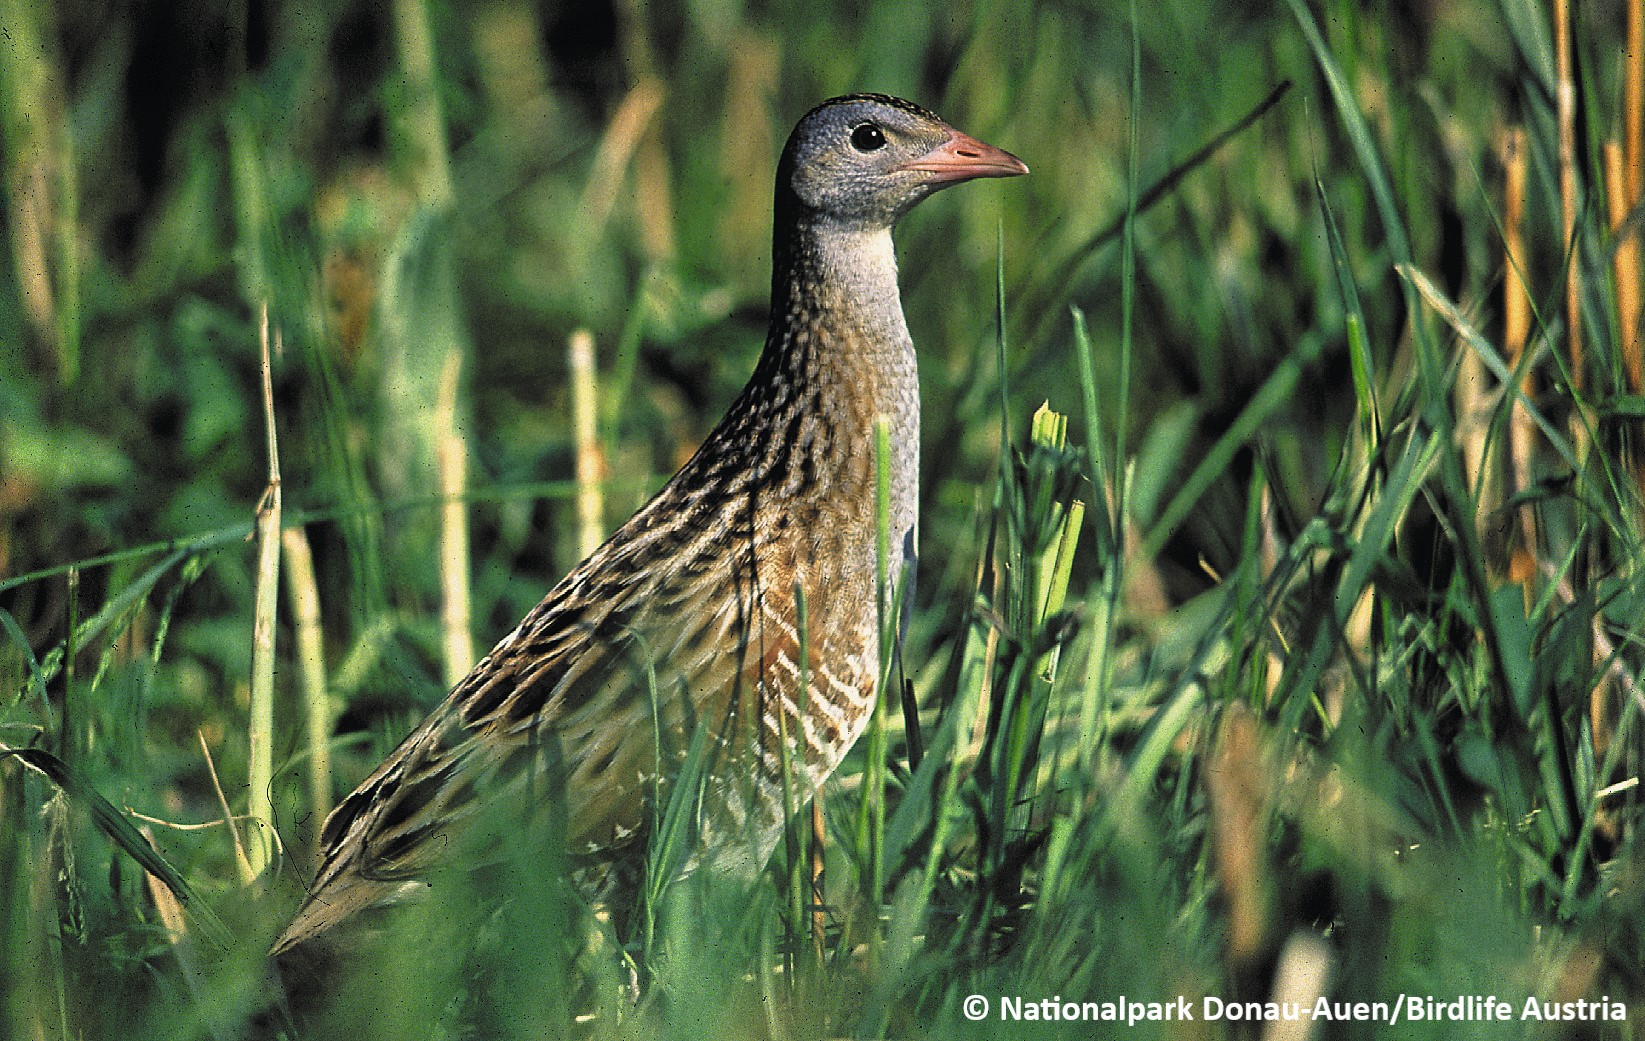 Picture of the Corn Crake - Crex crex sitting in the grass